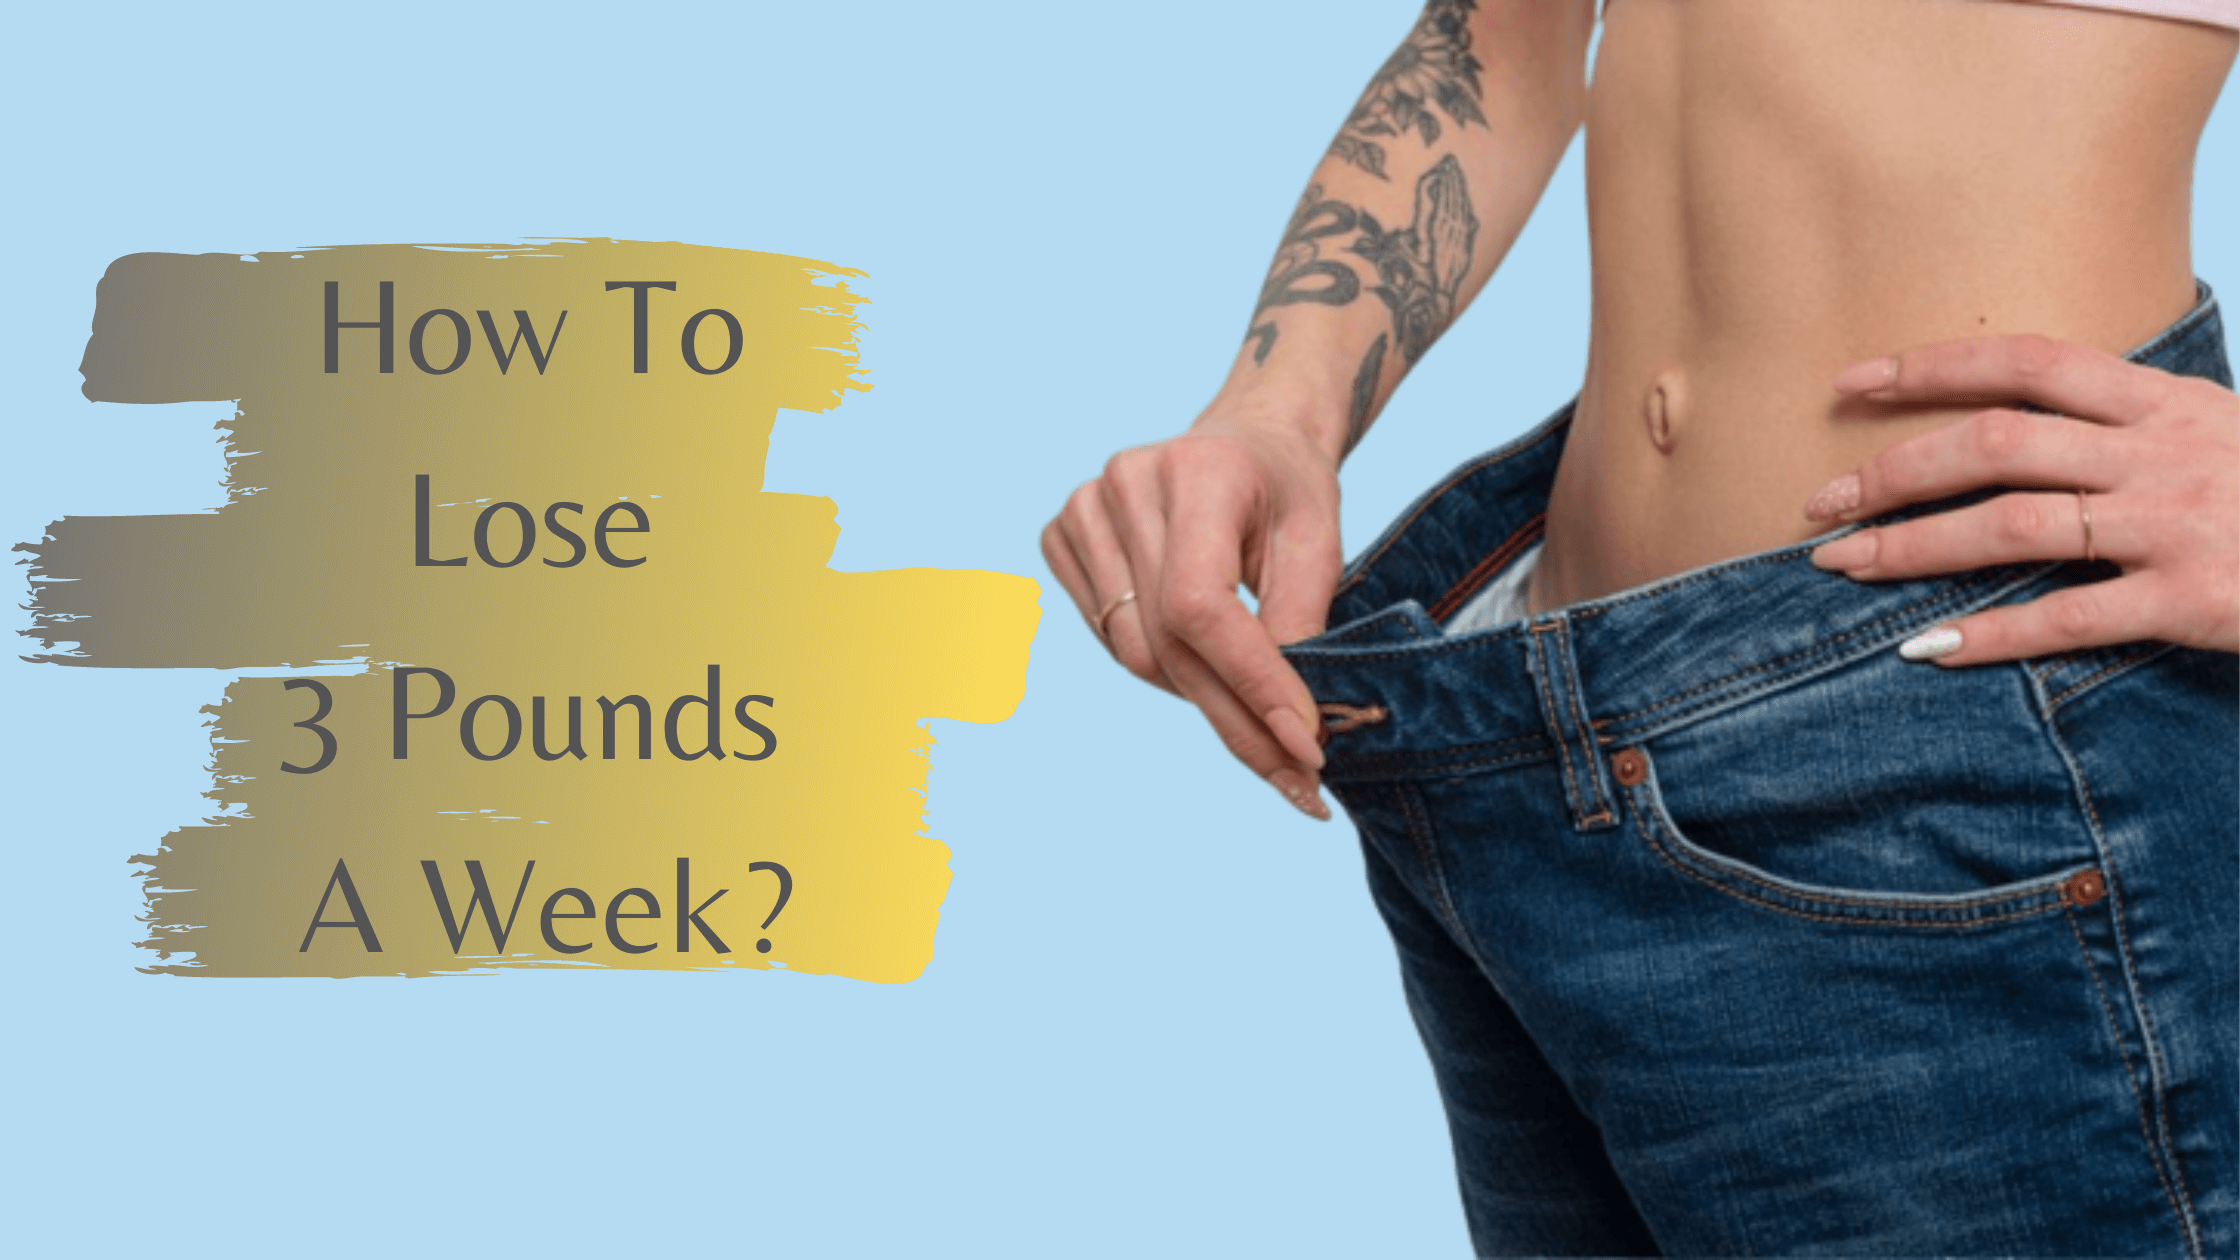 How To Lose 3 Pounds A Week